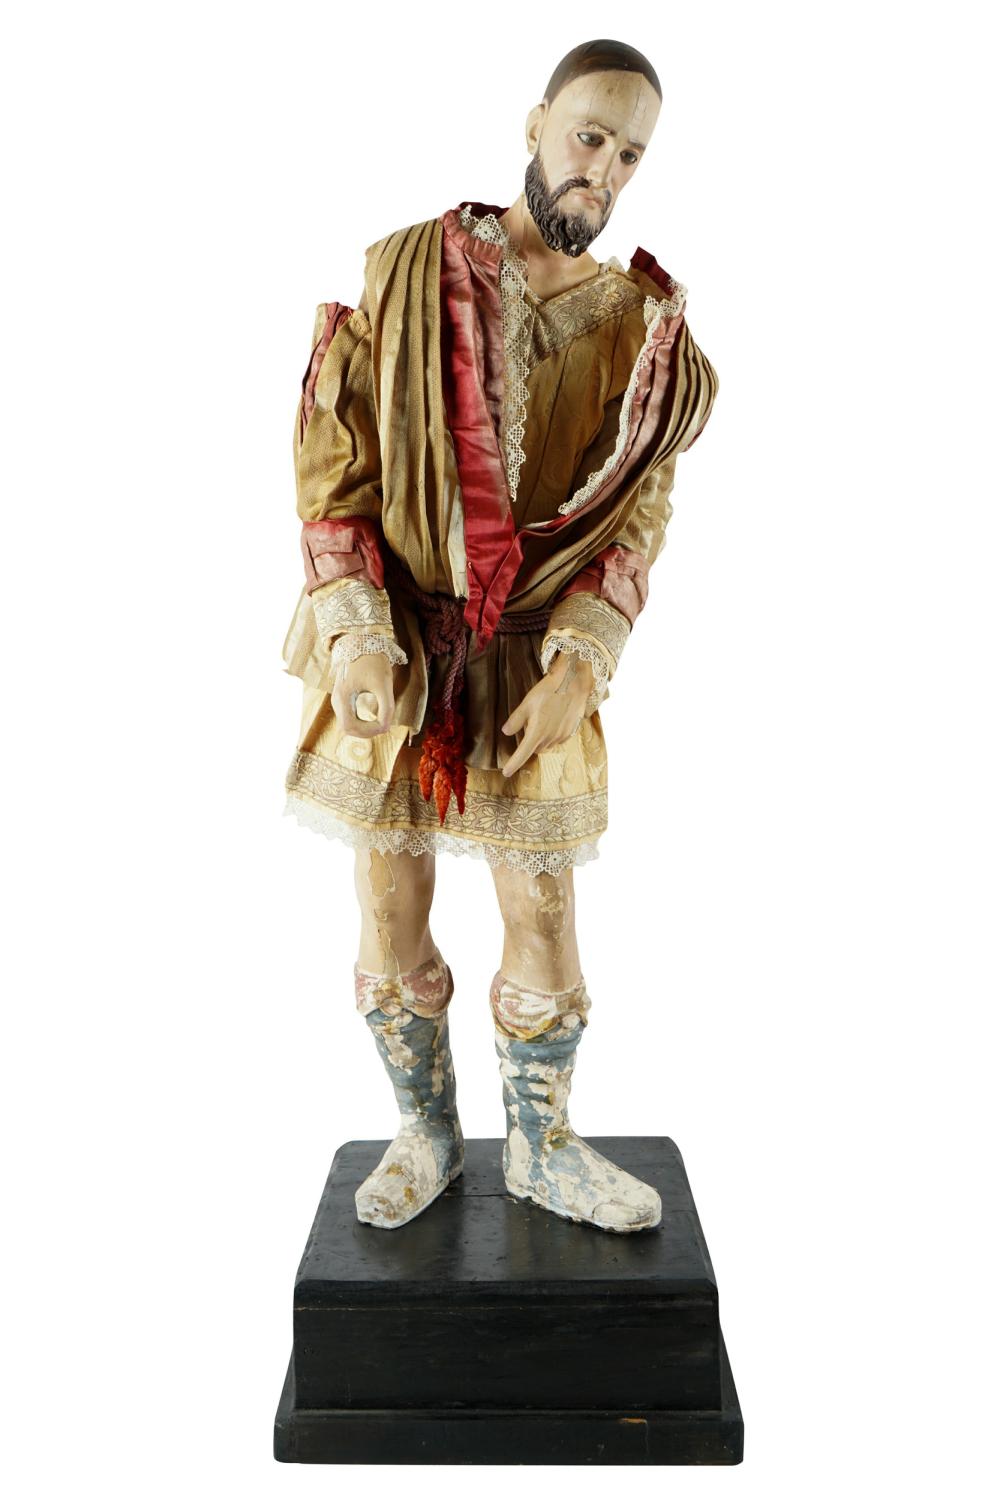 COLONIAL CARVED POLYCHROME FIGURE 332a28